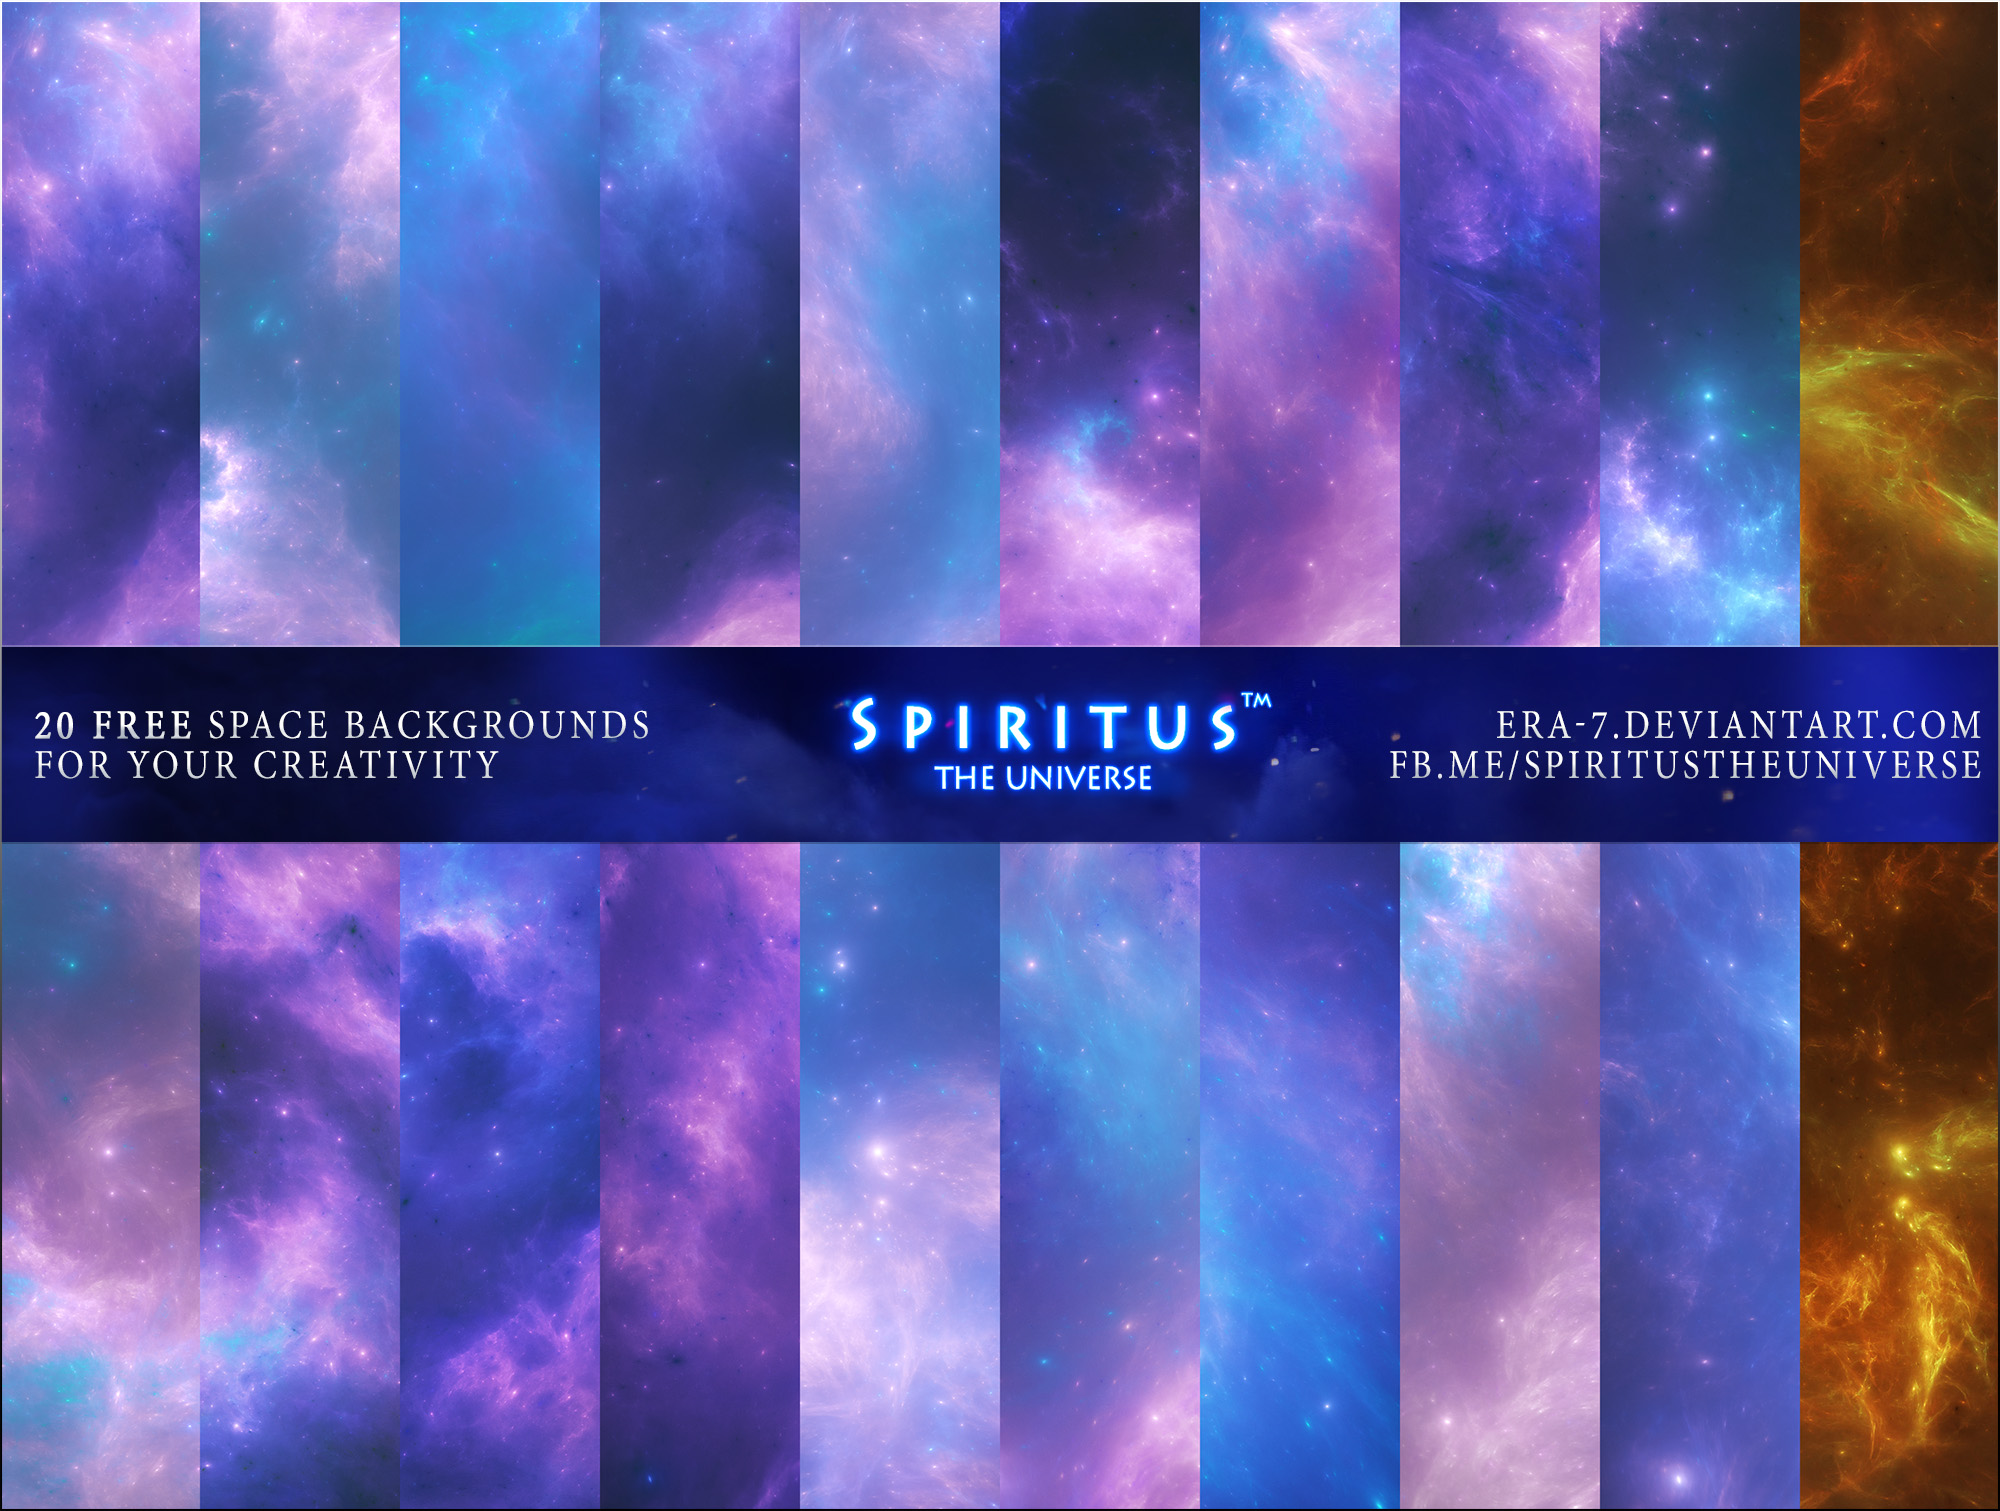 20 FREE SPACE BACKGROUNDS - PACK 1